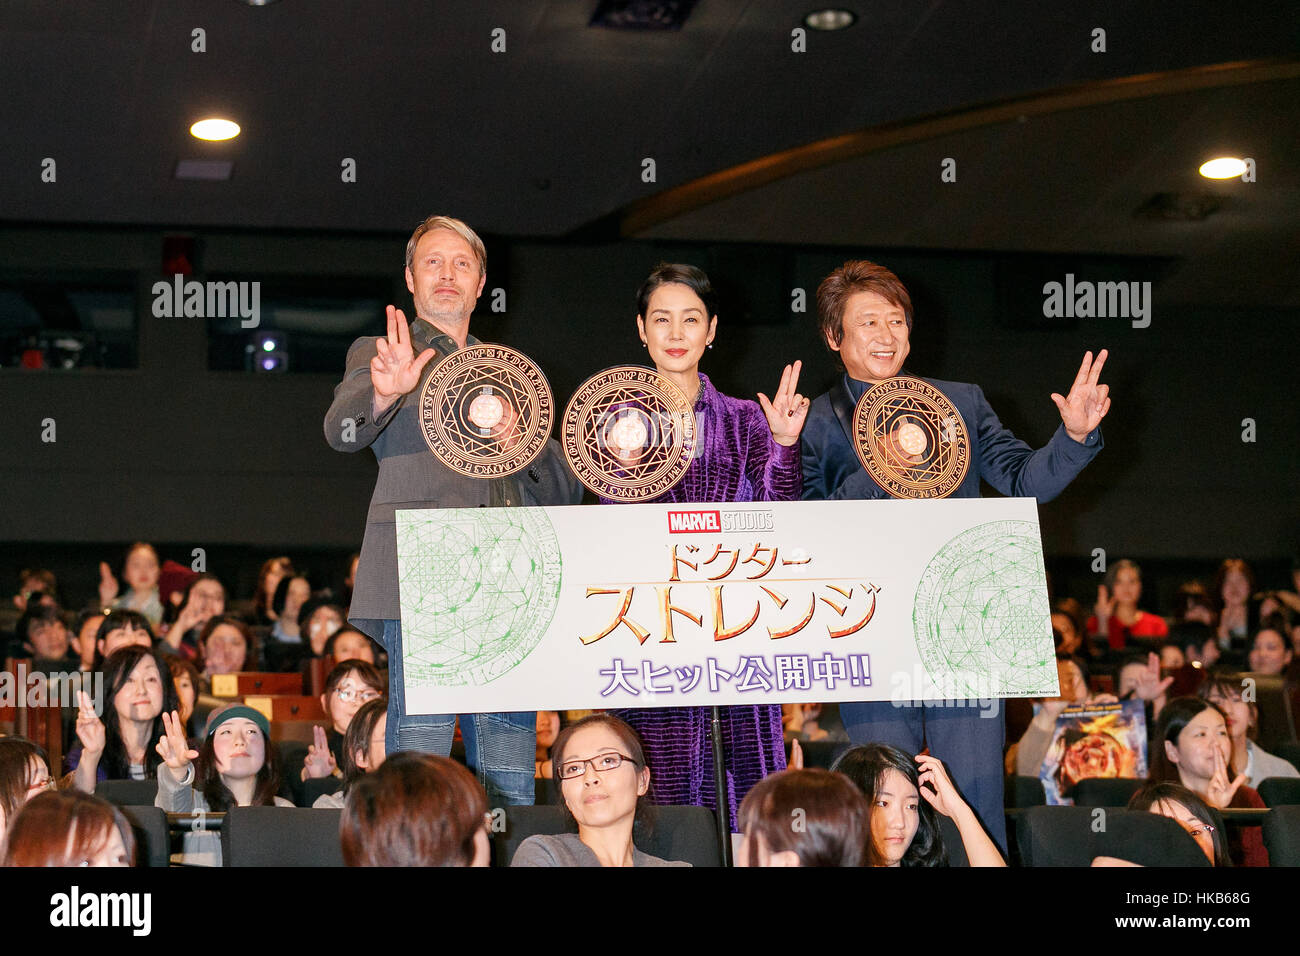 Tokyo, Japan. 27th Jan, 2017. (L to R) Danish actor Mads Mikkelsen, actress Kanako Higuchi and voice actor Kazuhiko Inoue, pose for cameras during a press conference for the film 'Doctor Strange' in Tokyo, Japan. Mikkelsen plays the villain Kaecilius in the Marvel Comics movie starring superhero 'Doctor Strange' played by Benedict Cumberbatch. The film recently earned an Oscar nomination for Best Visual Effects and opens in Japan on January 27. Credit: Rodrigo Reyes Marin/AFLO/Alamy Live News Stock Photo